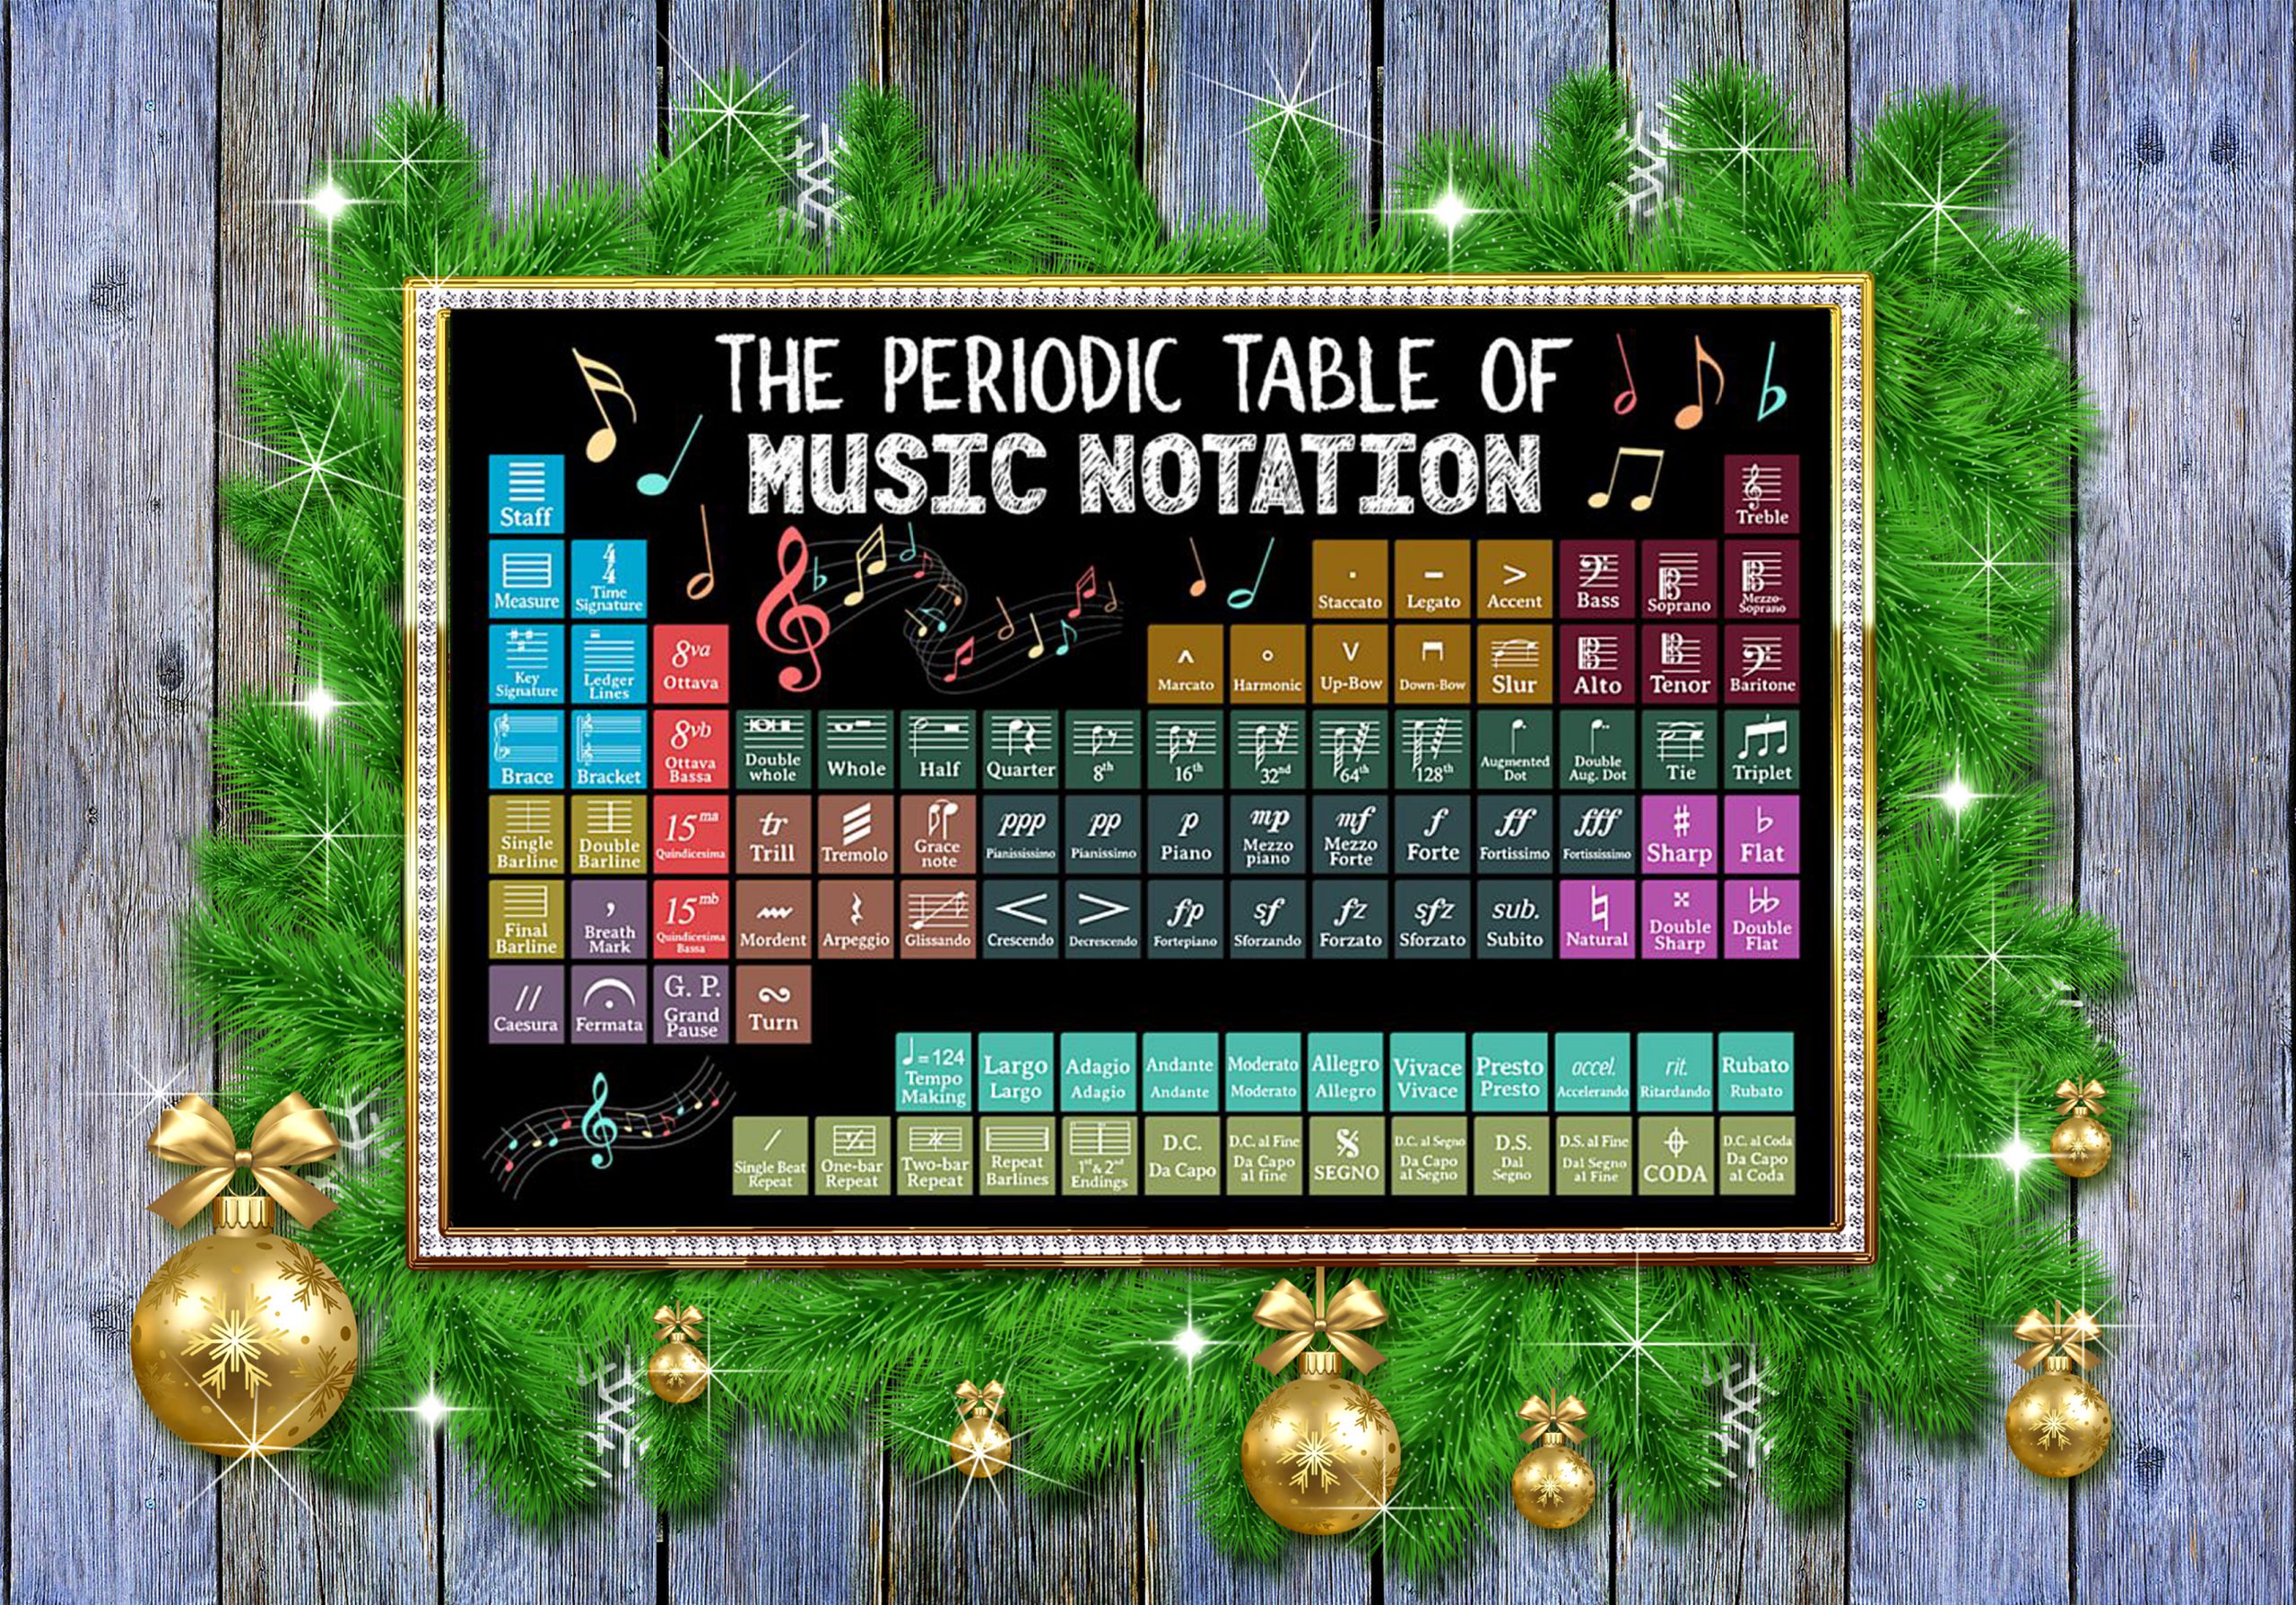 The periodic table of music notation poster